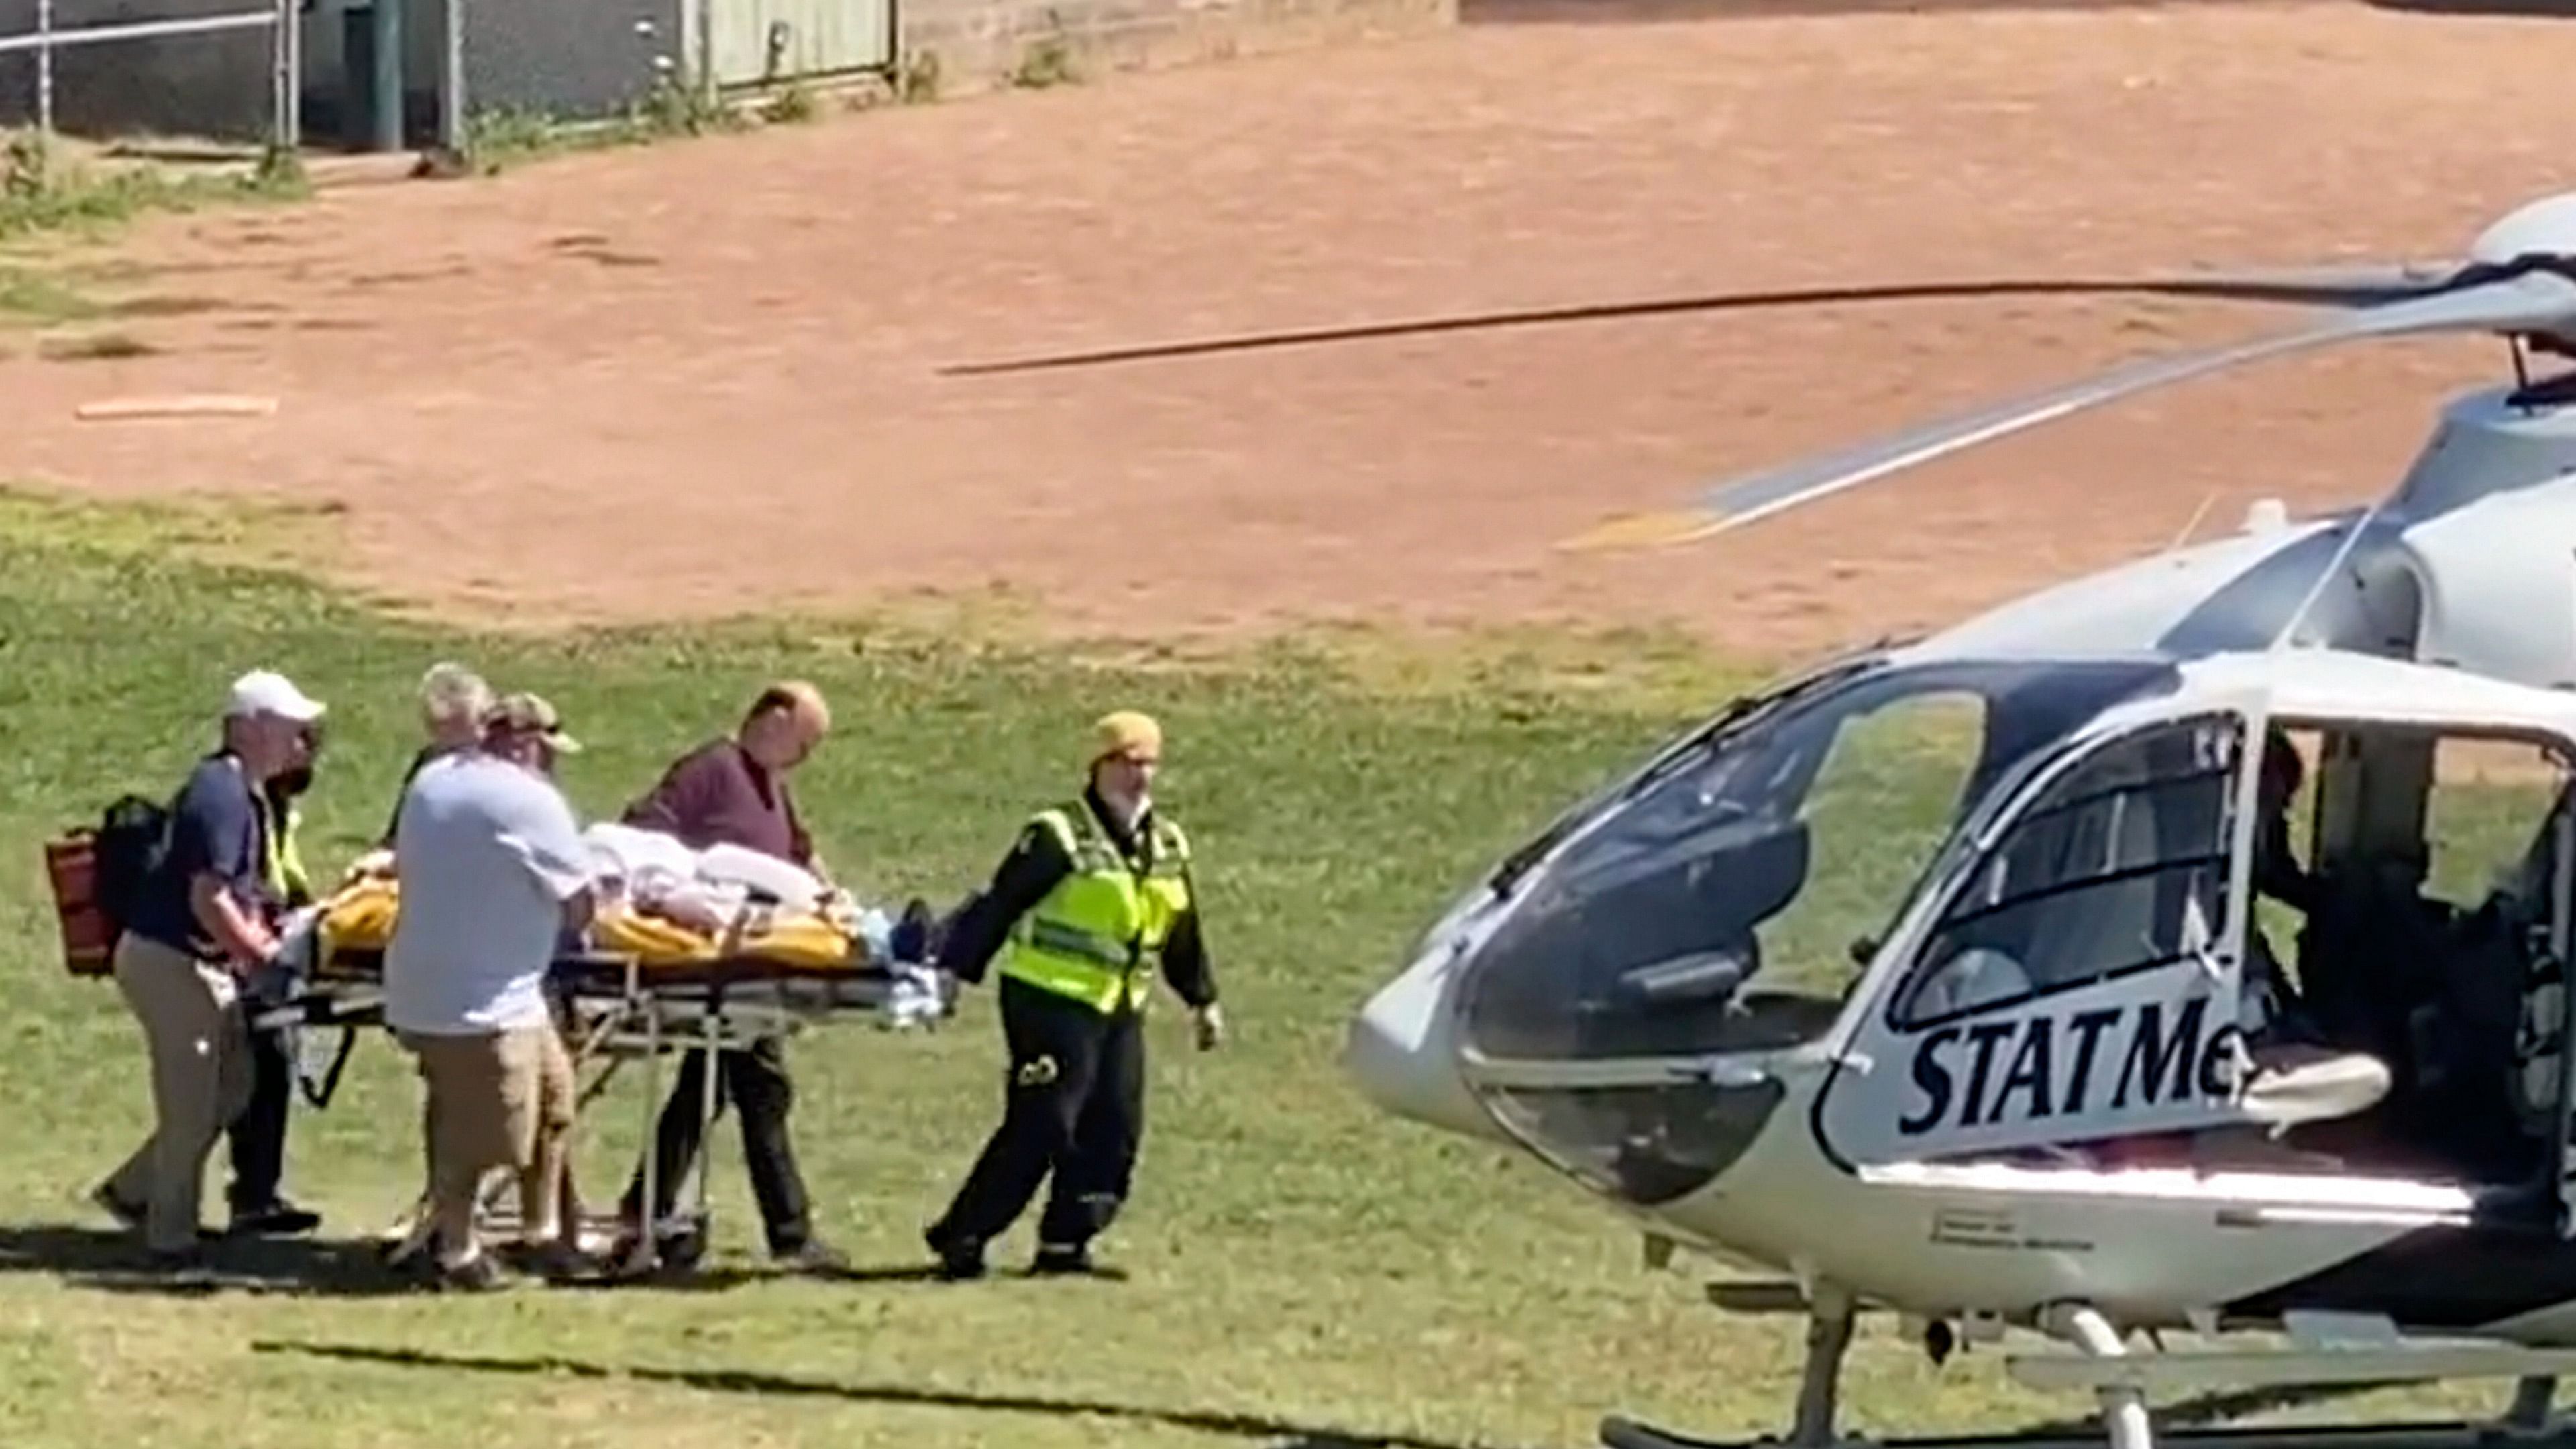 Author Salman Rushdie is taken on a stretcher to a helicopter for transport to a hospital after he was attacked during a lecture at the Chautauqua Institution in Chautauqua, N.Y. Credit: AP/PTI Photo